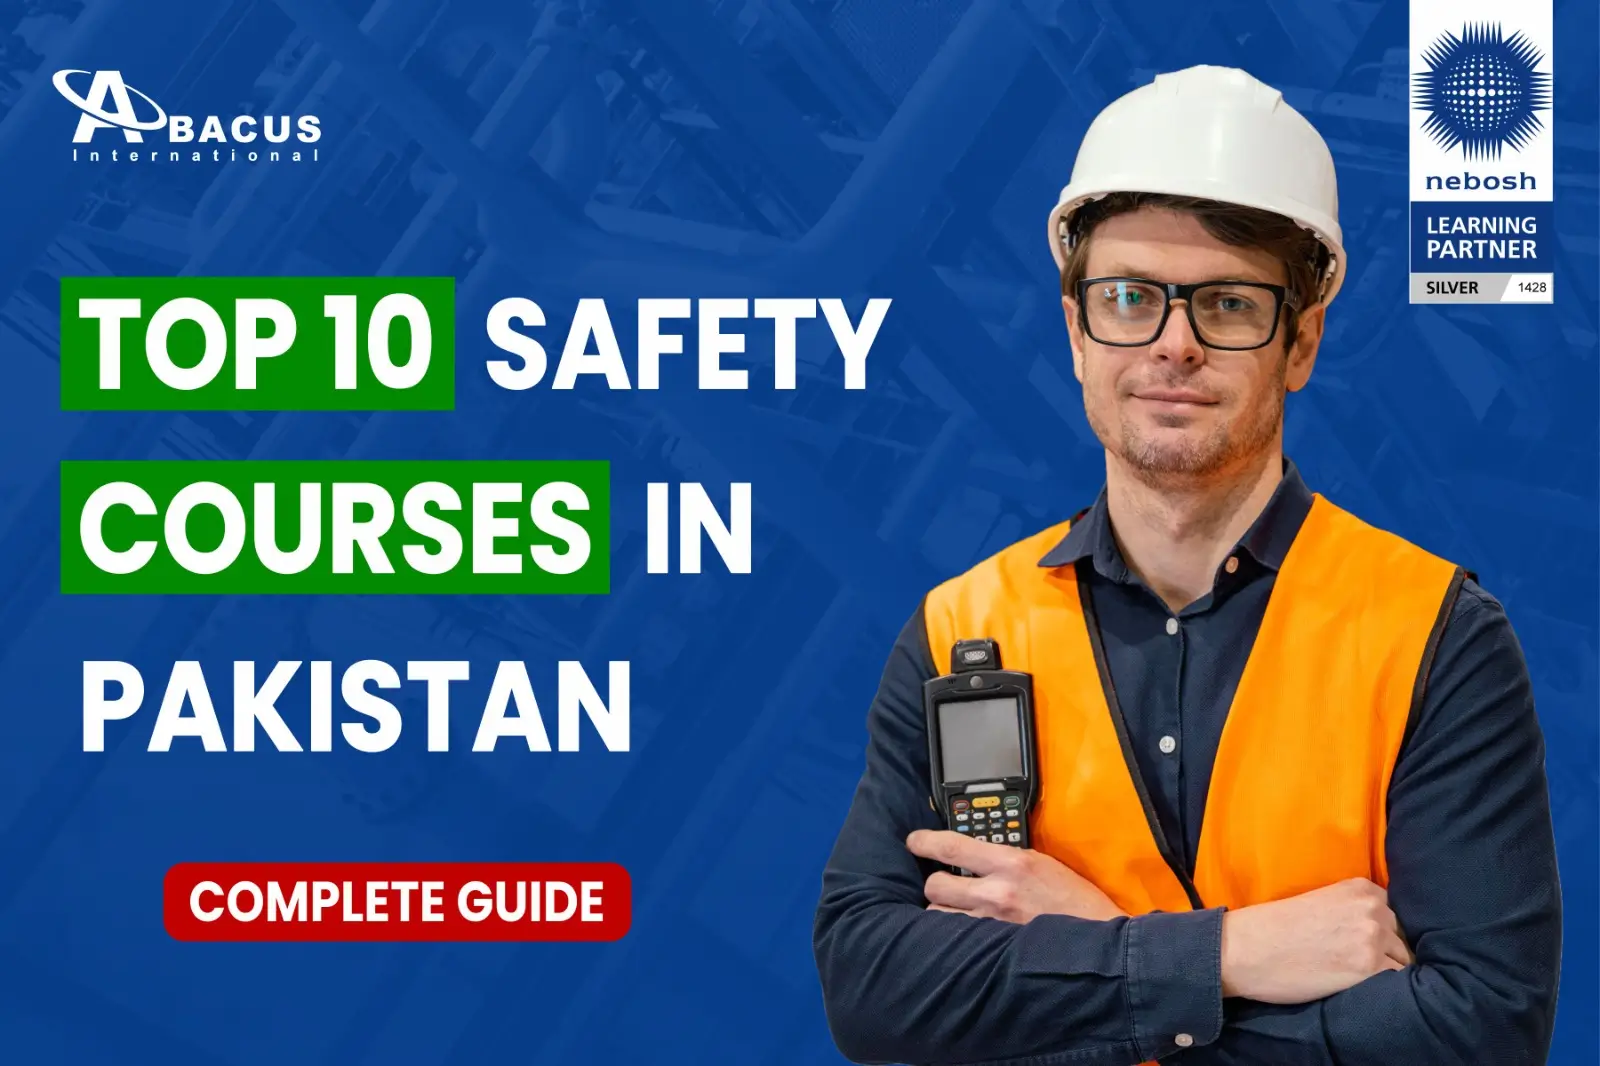 Top 10 Health & Safety Courses in Pakistan